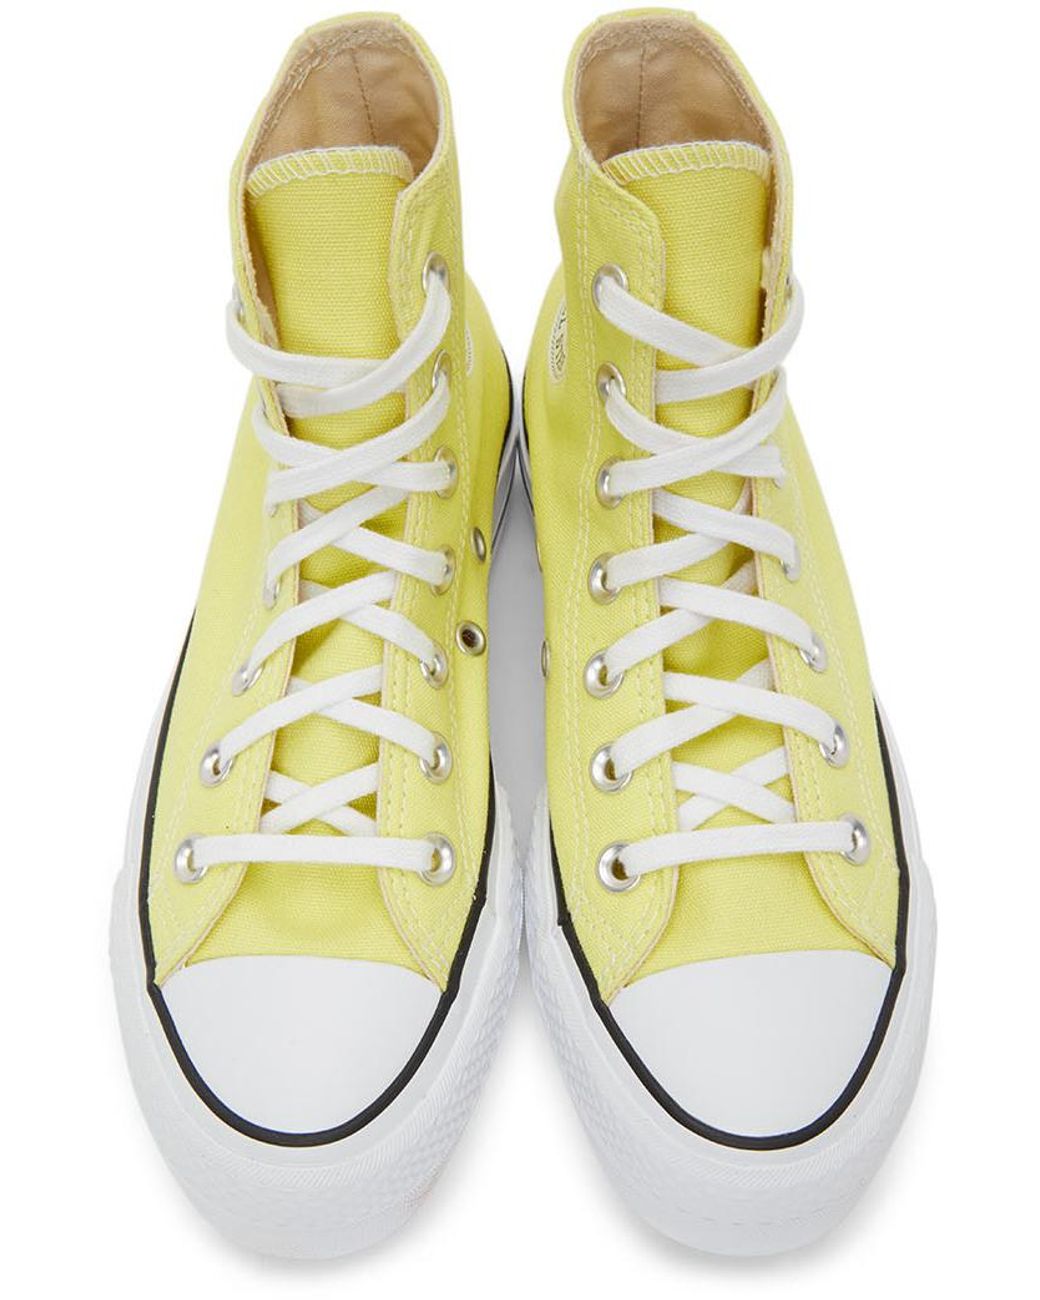 Converse Yellow Color Platform Chuck Taylor All Star High Sneakers | Lyst